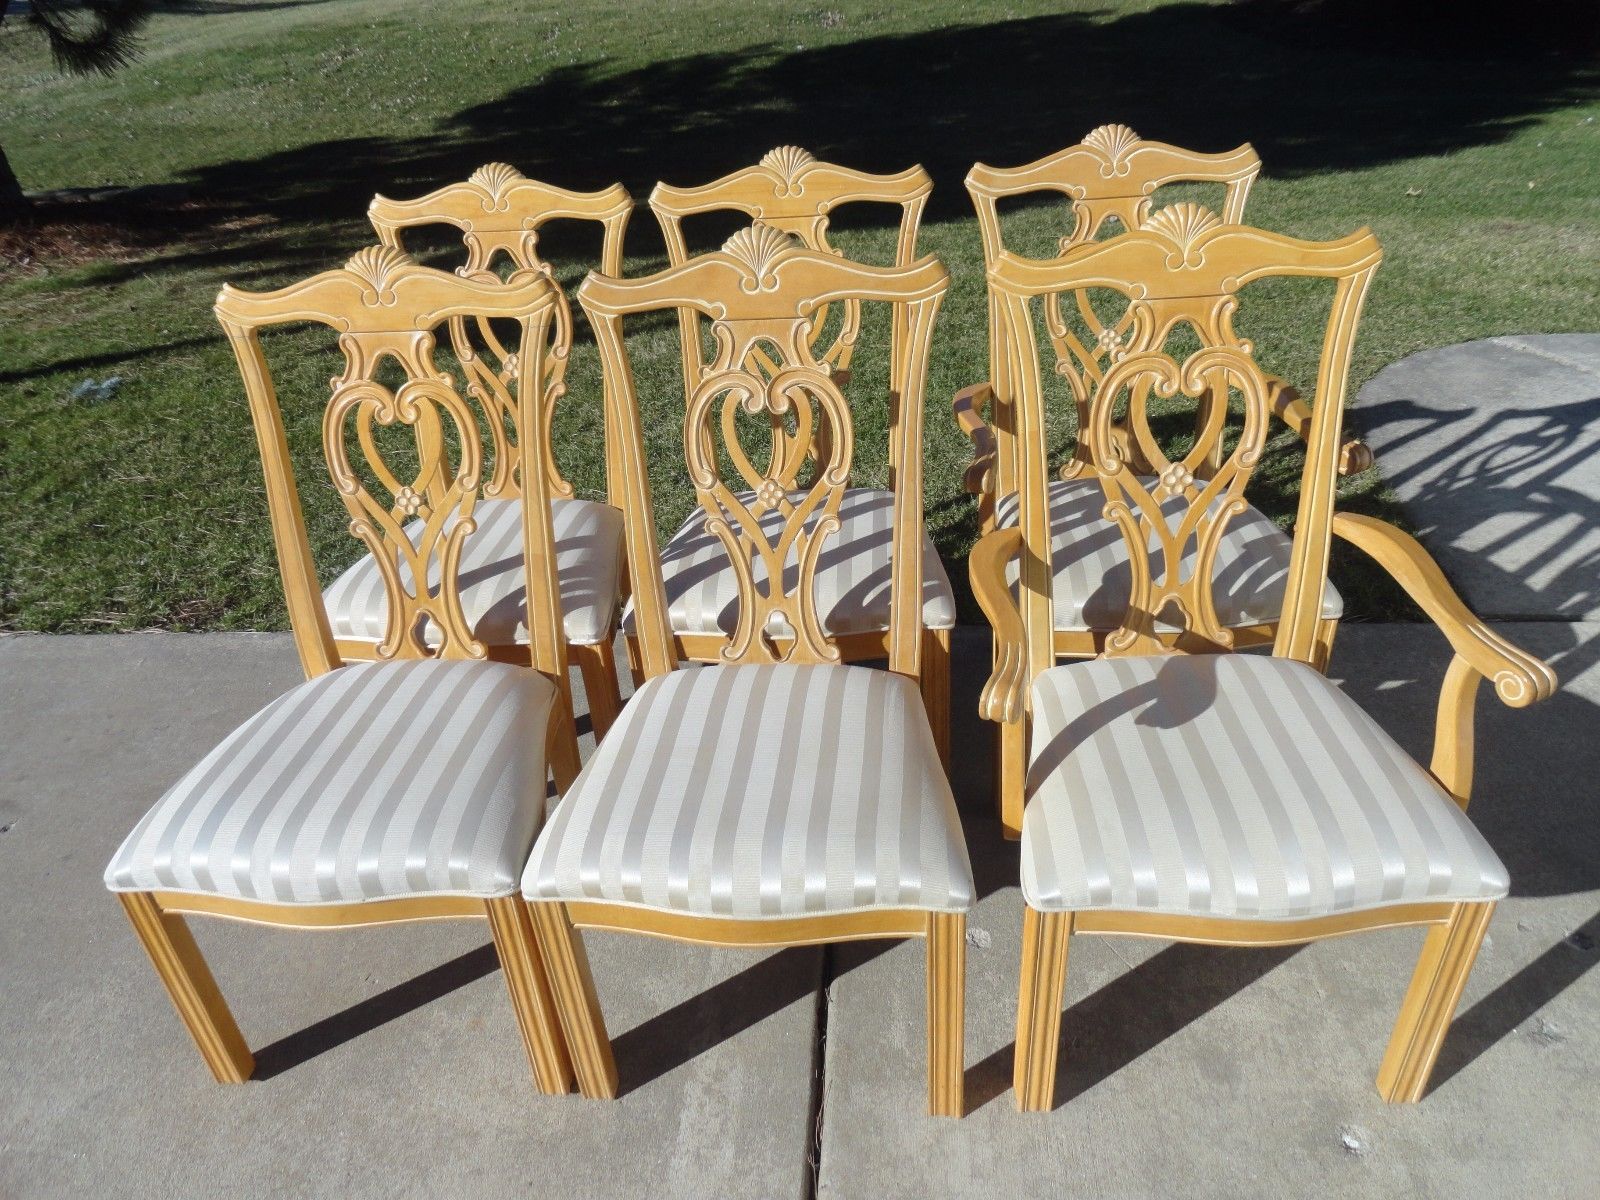 Chippendale Style Vintage Dining Chairs / set of 6.